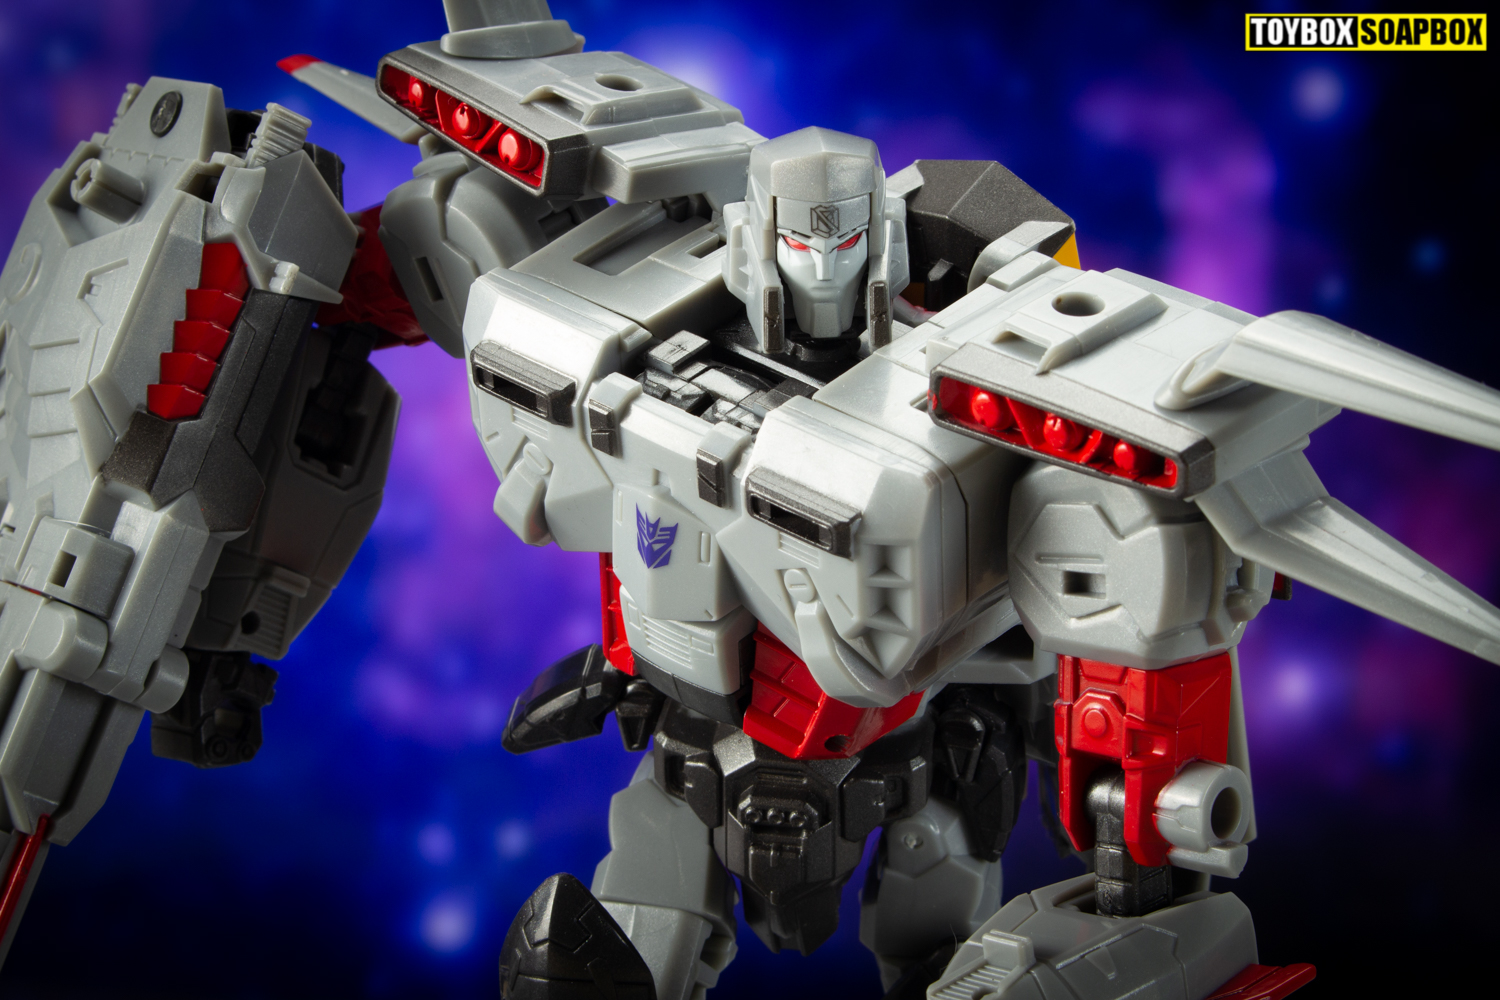 Transformers-Takara-Tomy-Generations-Selects-TT-GS09-Super-Megatron-review